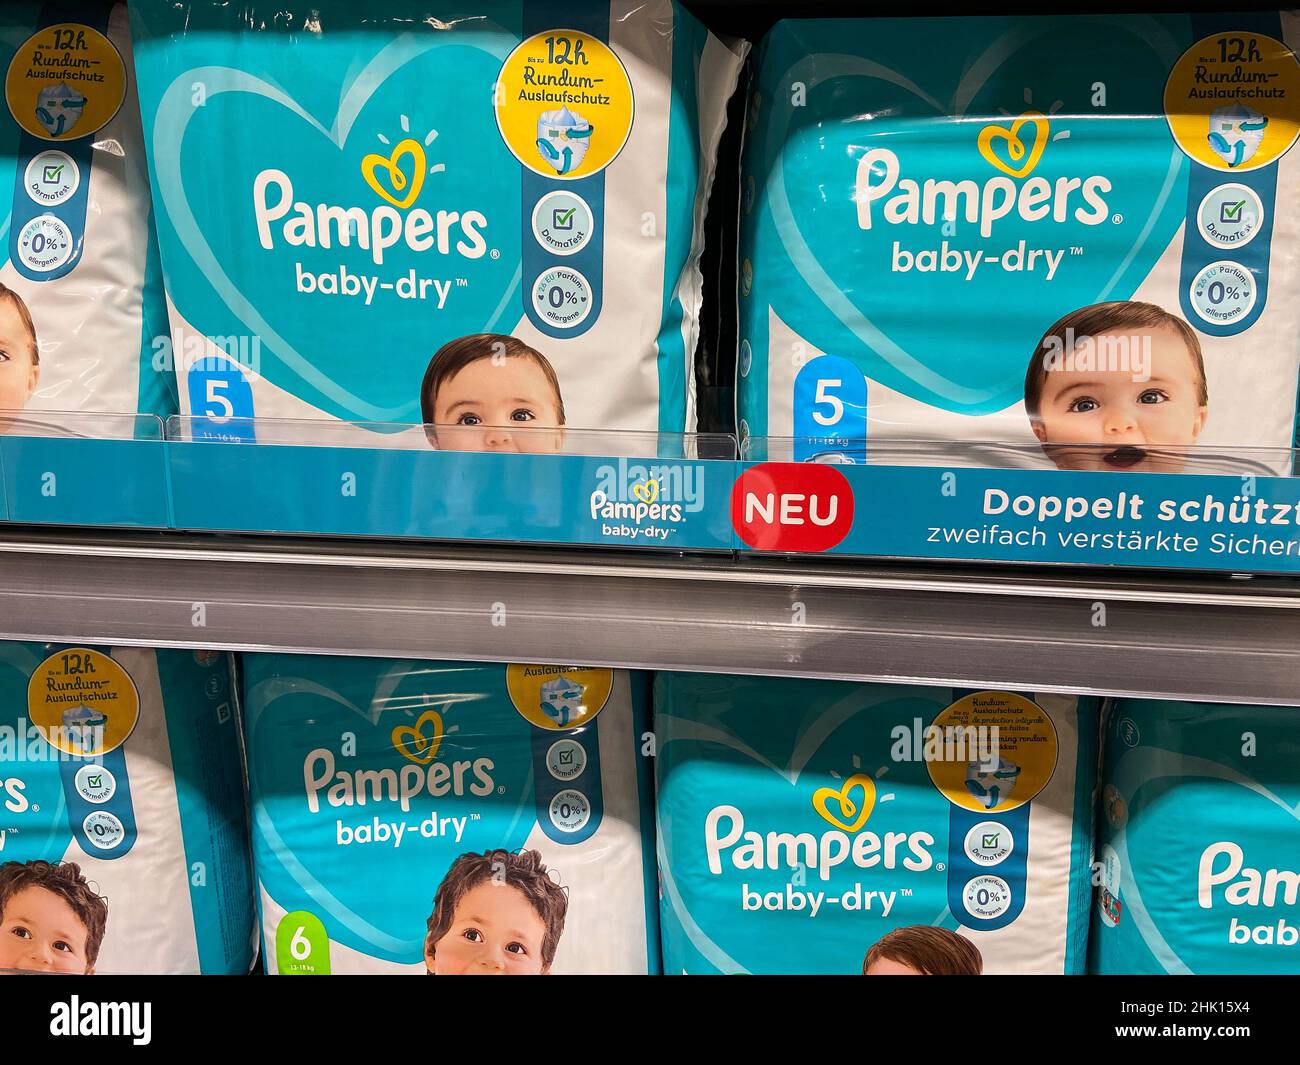 Baby diapers pampers Immagini e Fotos Stock - Alamy